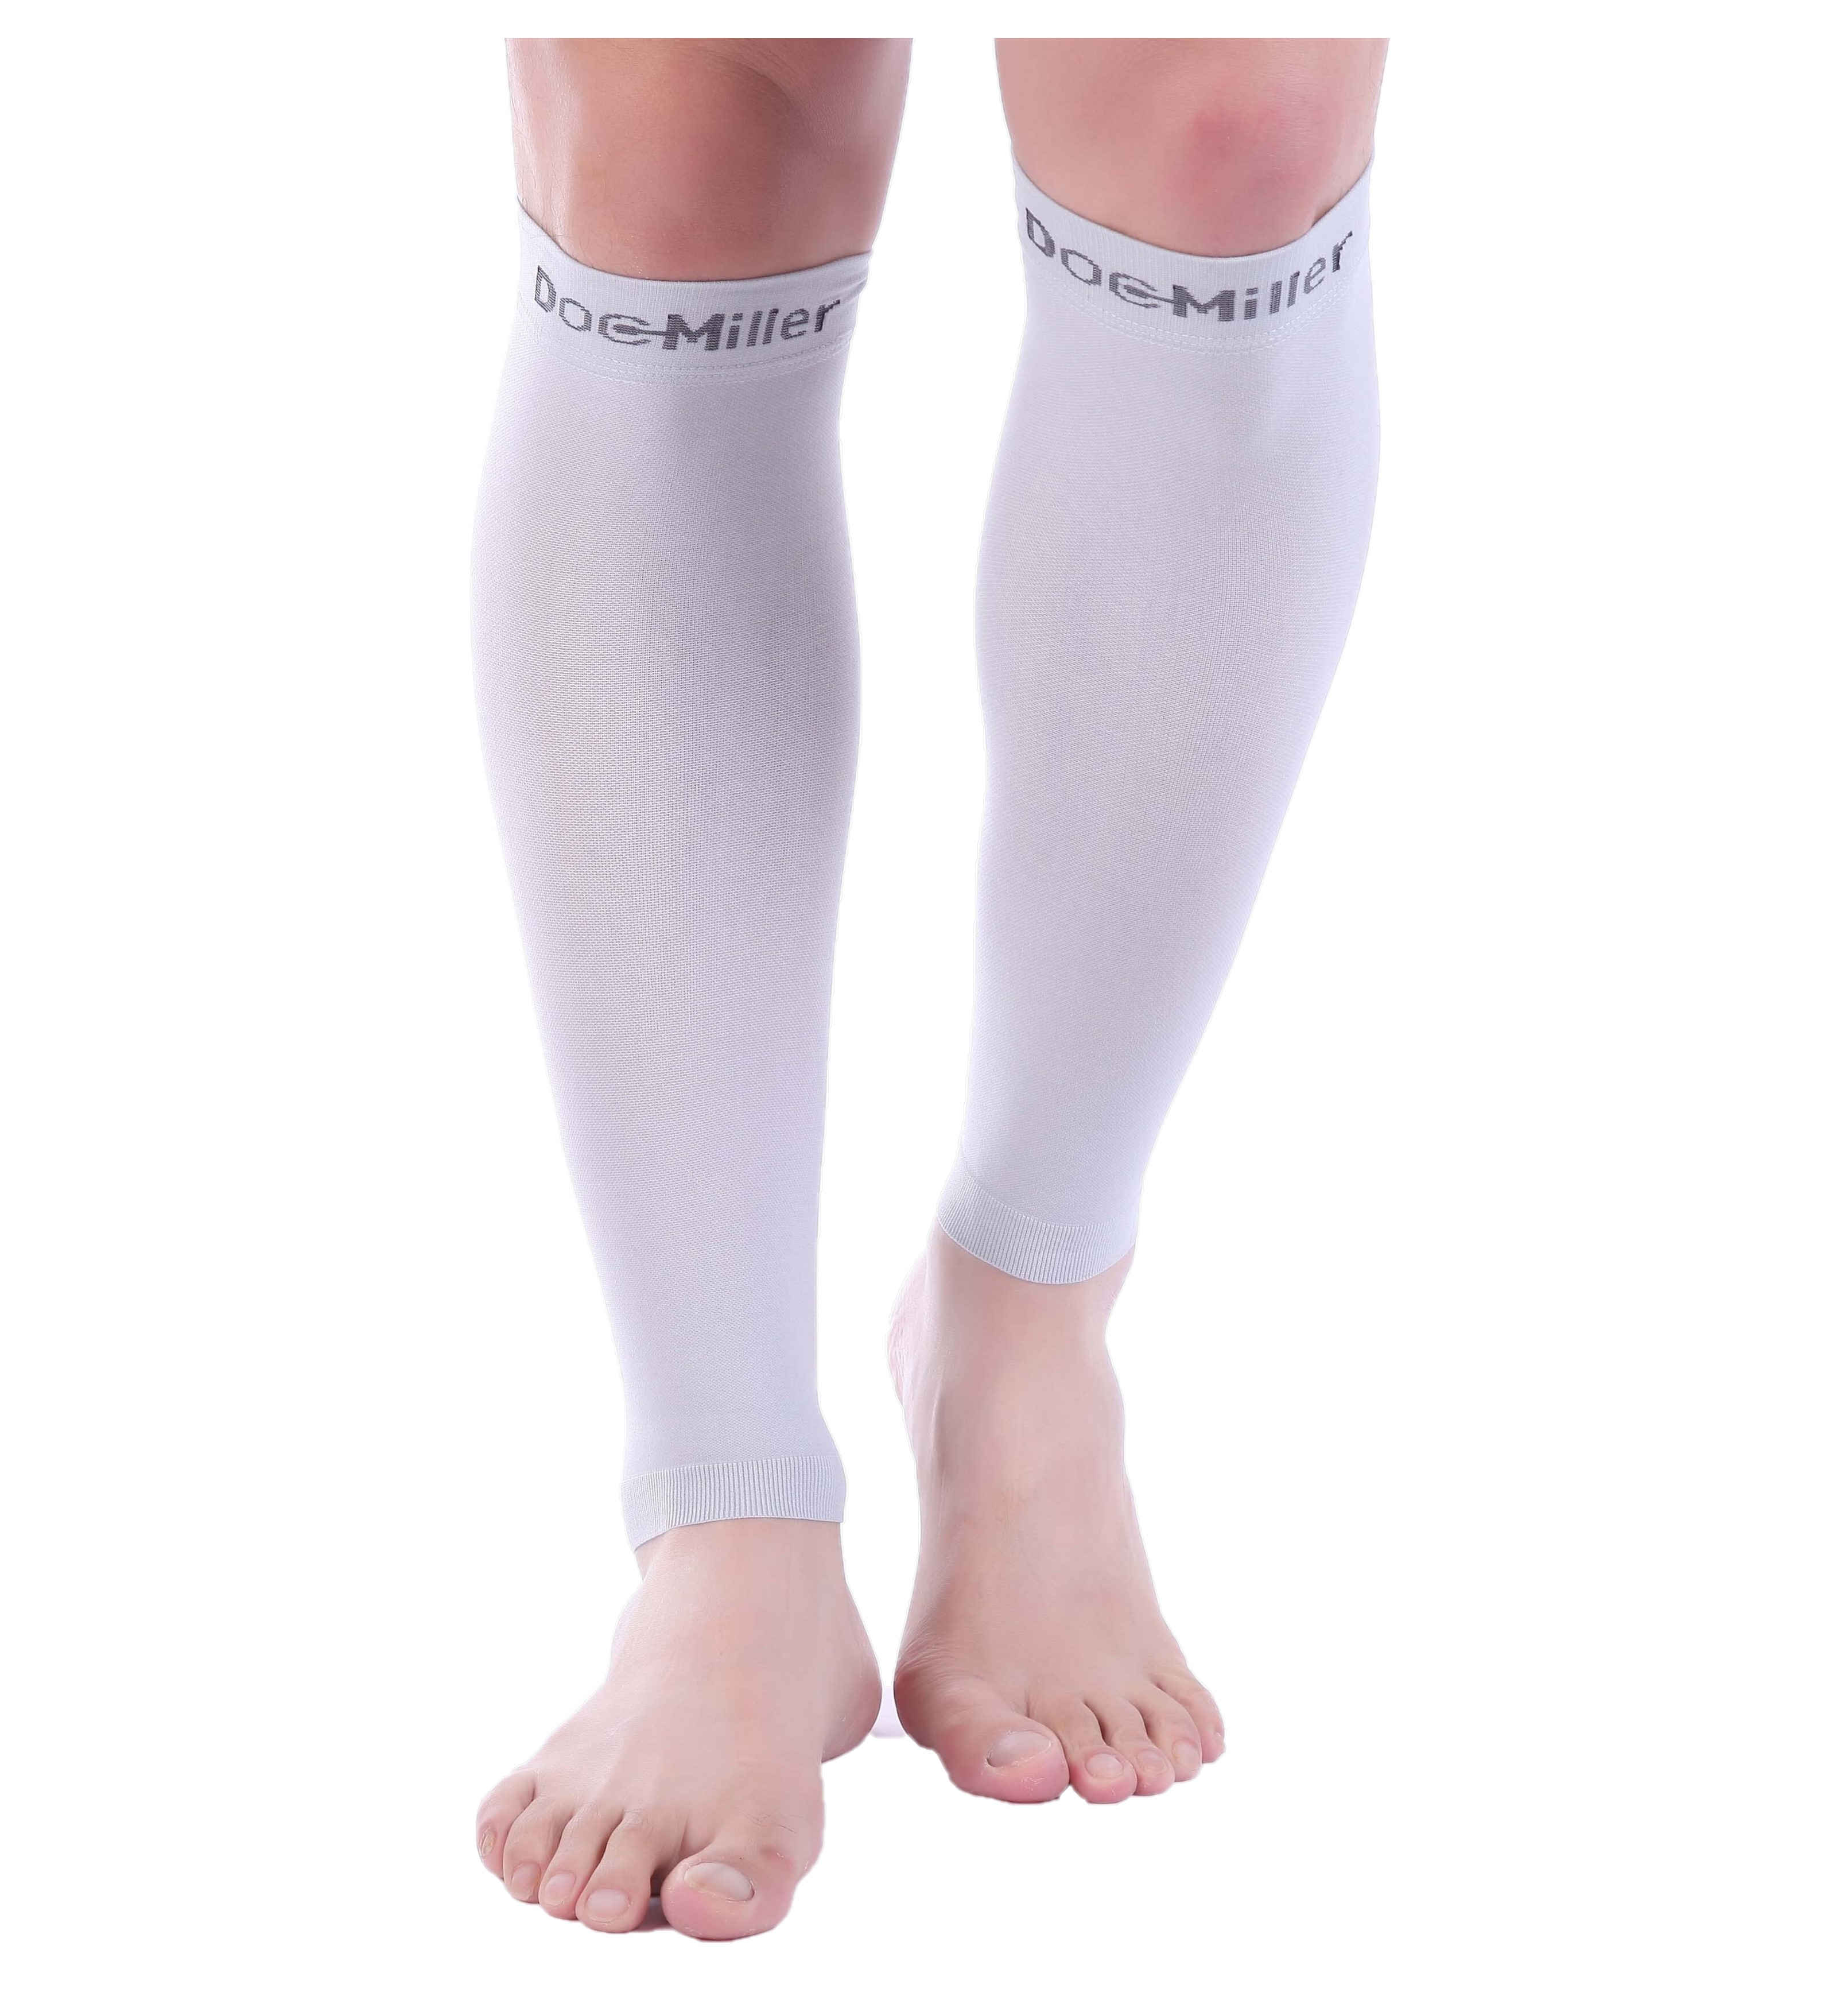 Premium Calf Compression Sleeve 15-20 mmHg GRAY by Doc Miller